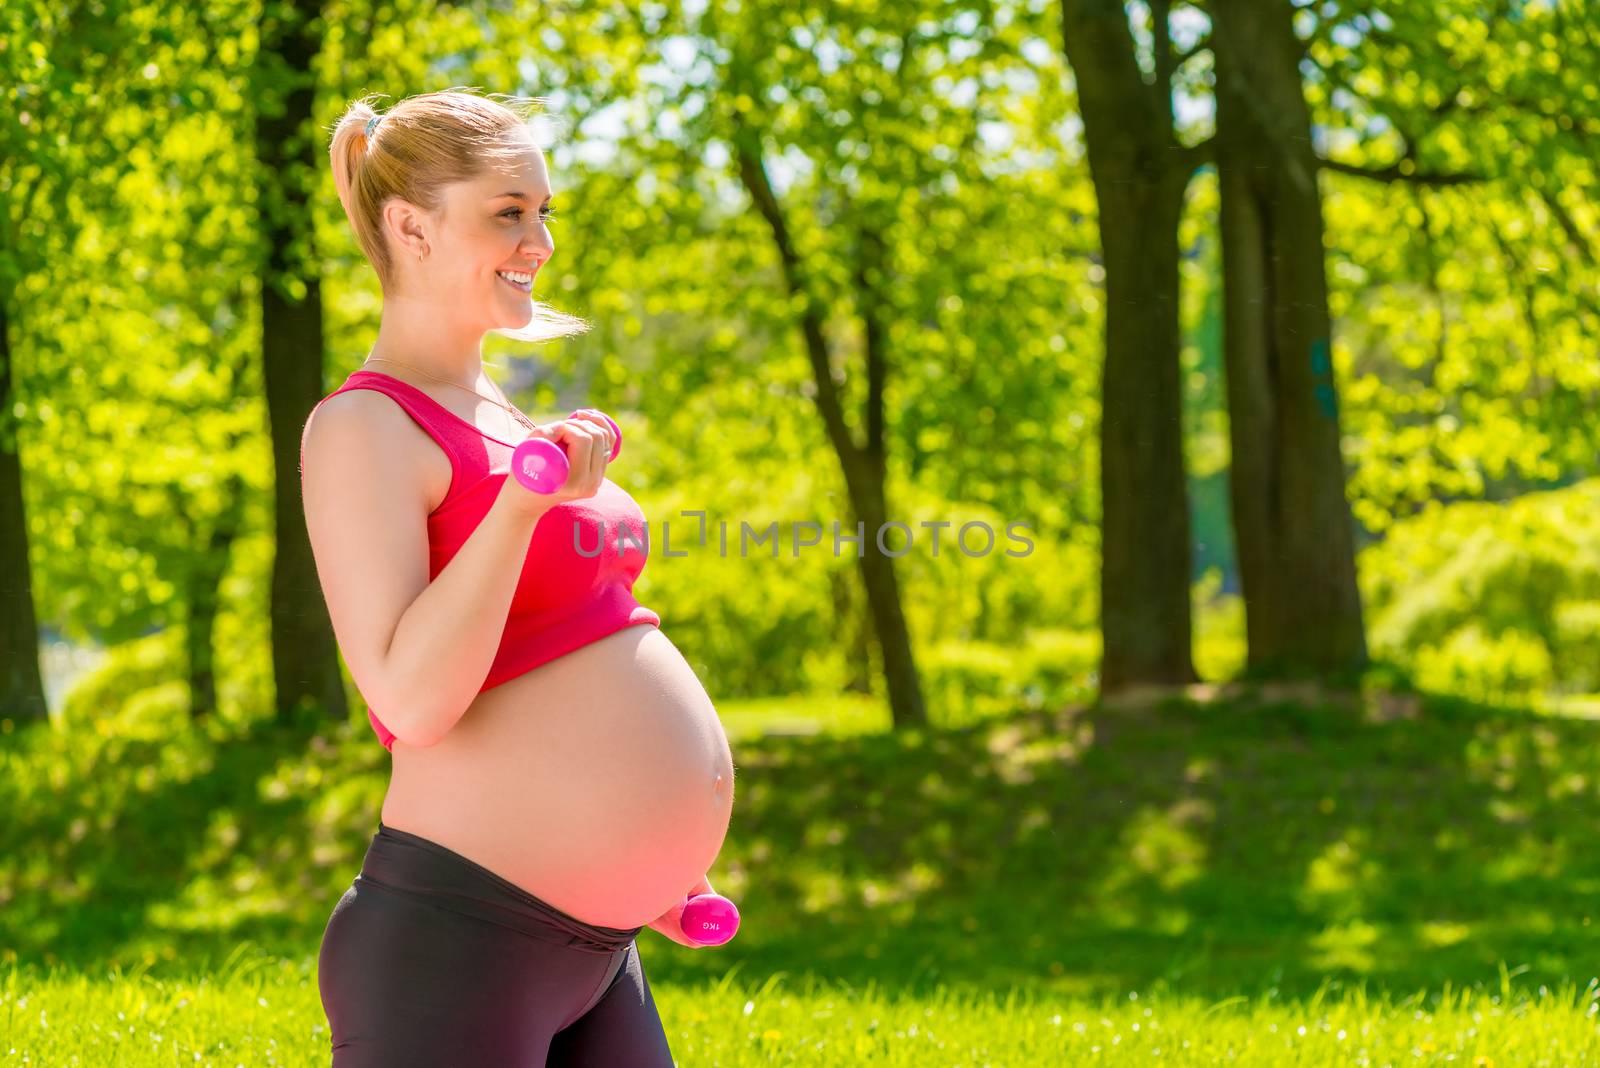 playing sports during pregnancy in the fresh air is good for hea by kosmsos111